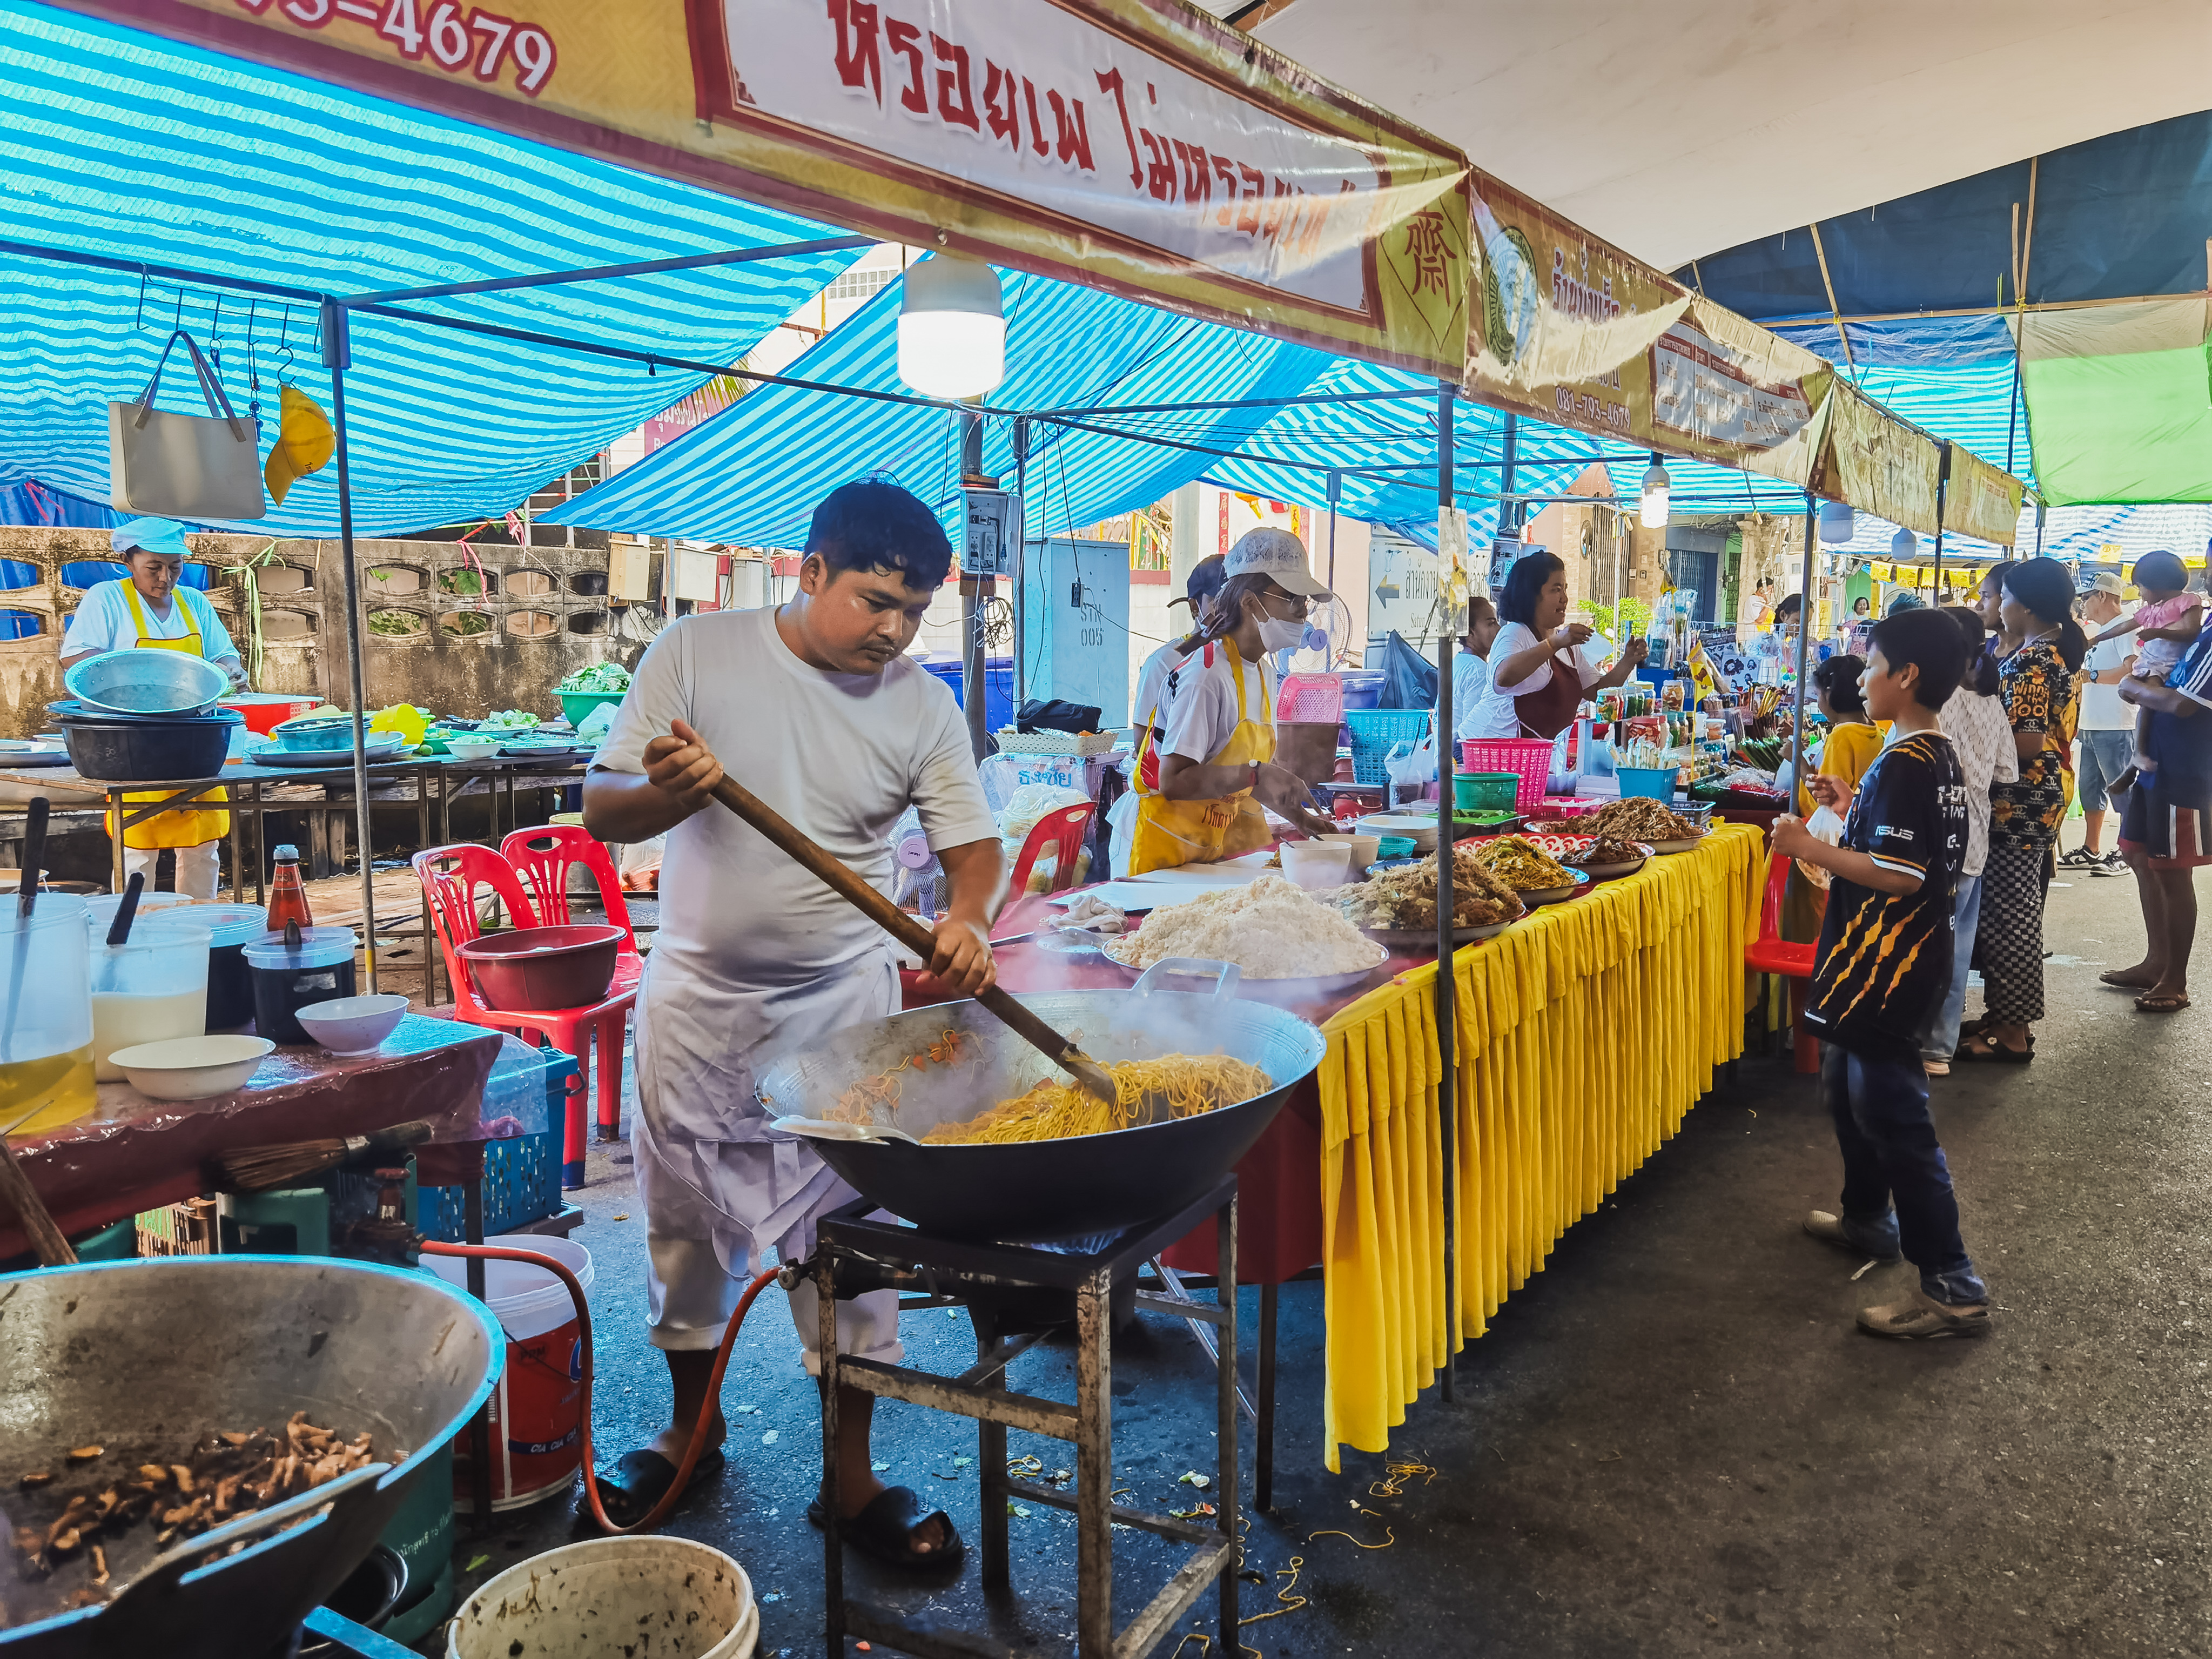 A food vendor stirs a large wok of noodles with a long poll.